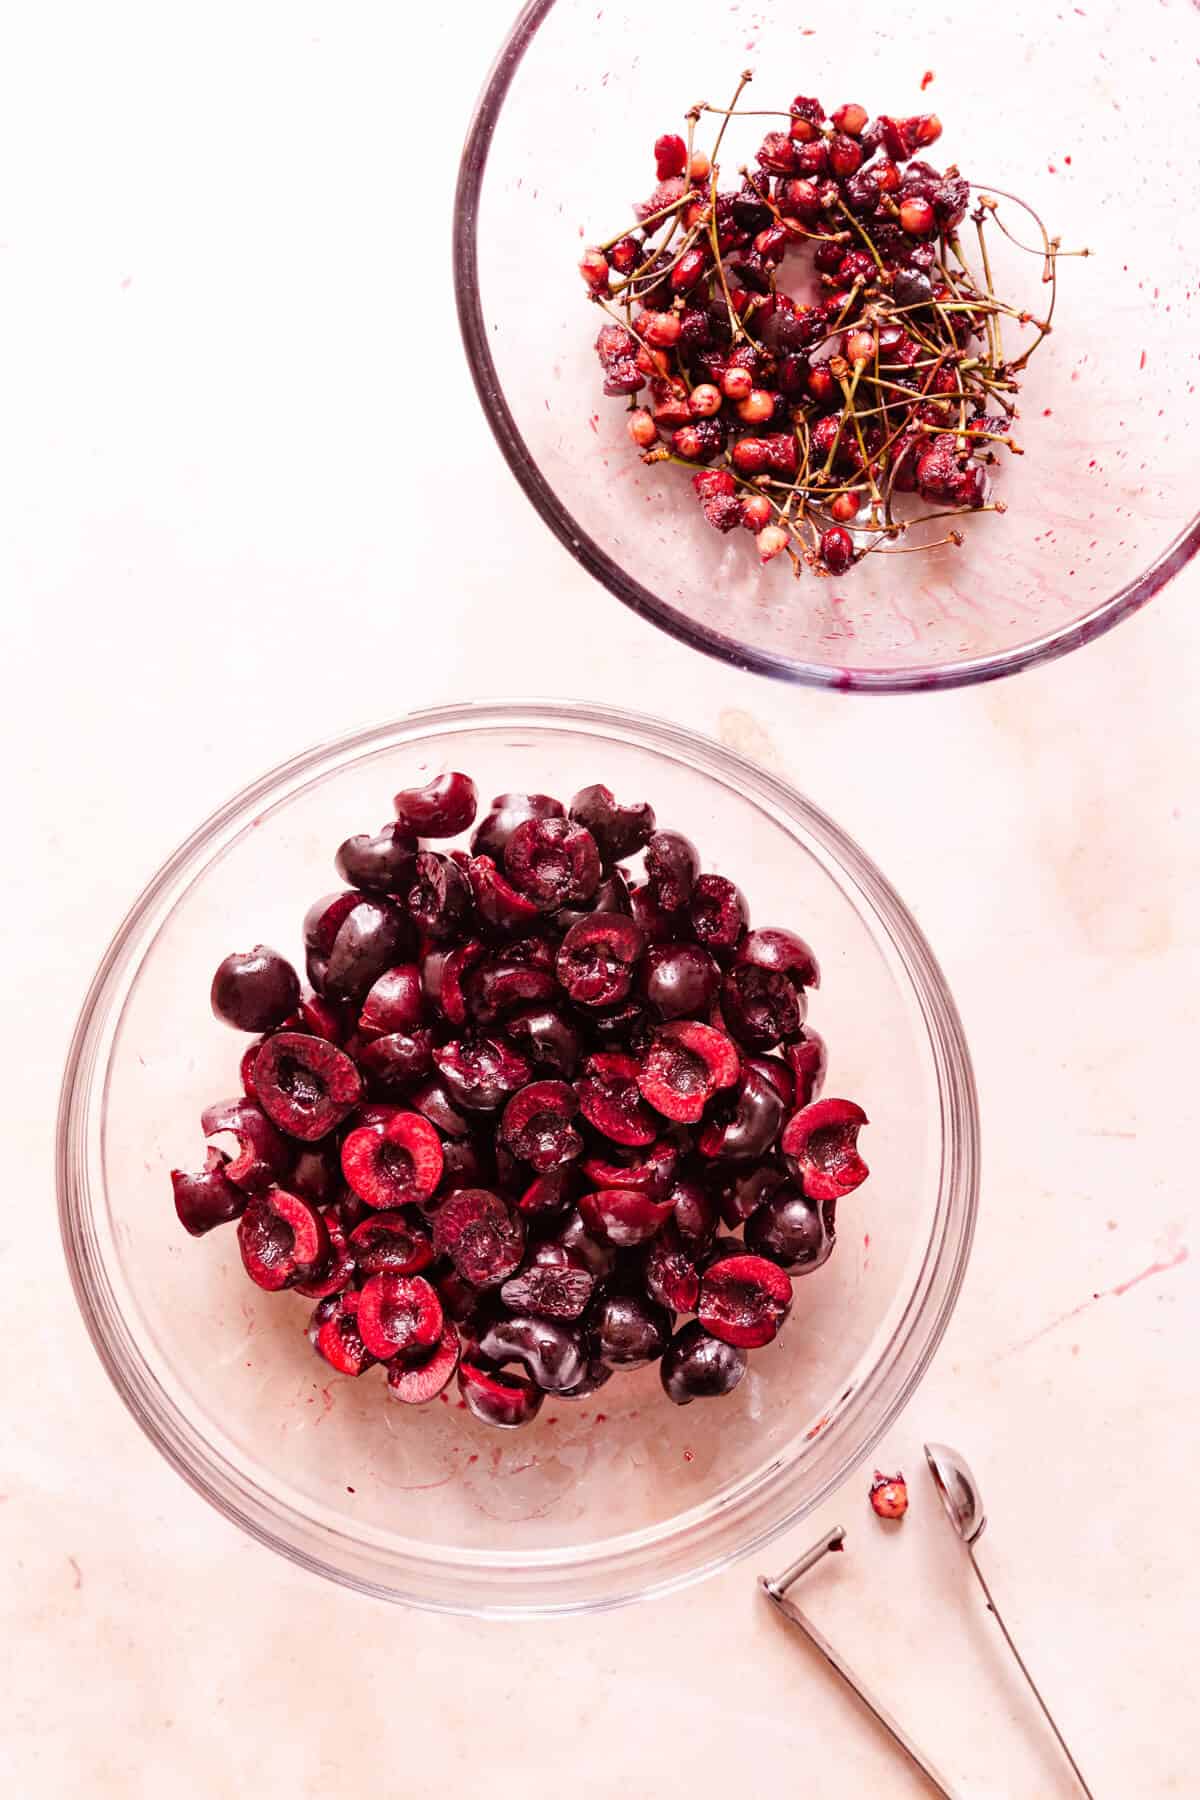 top view of pitted cherries in a bowl with another bowl of cherry stones and stalks